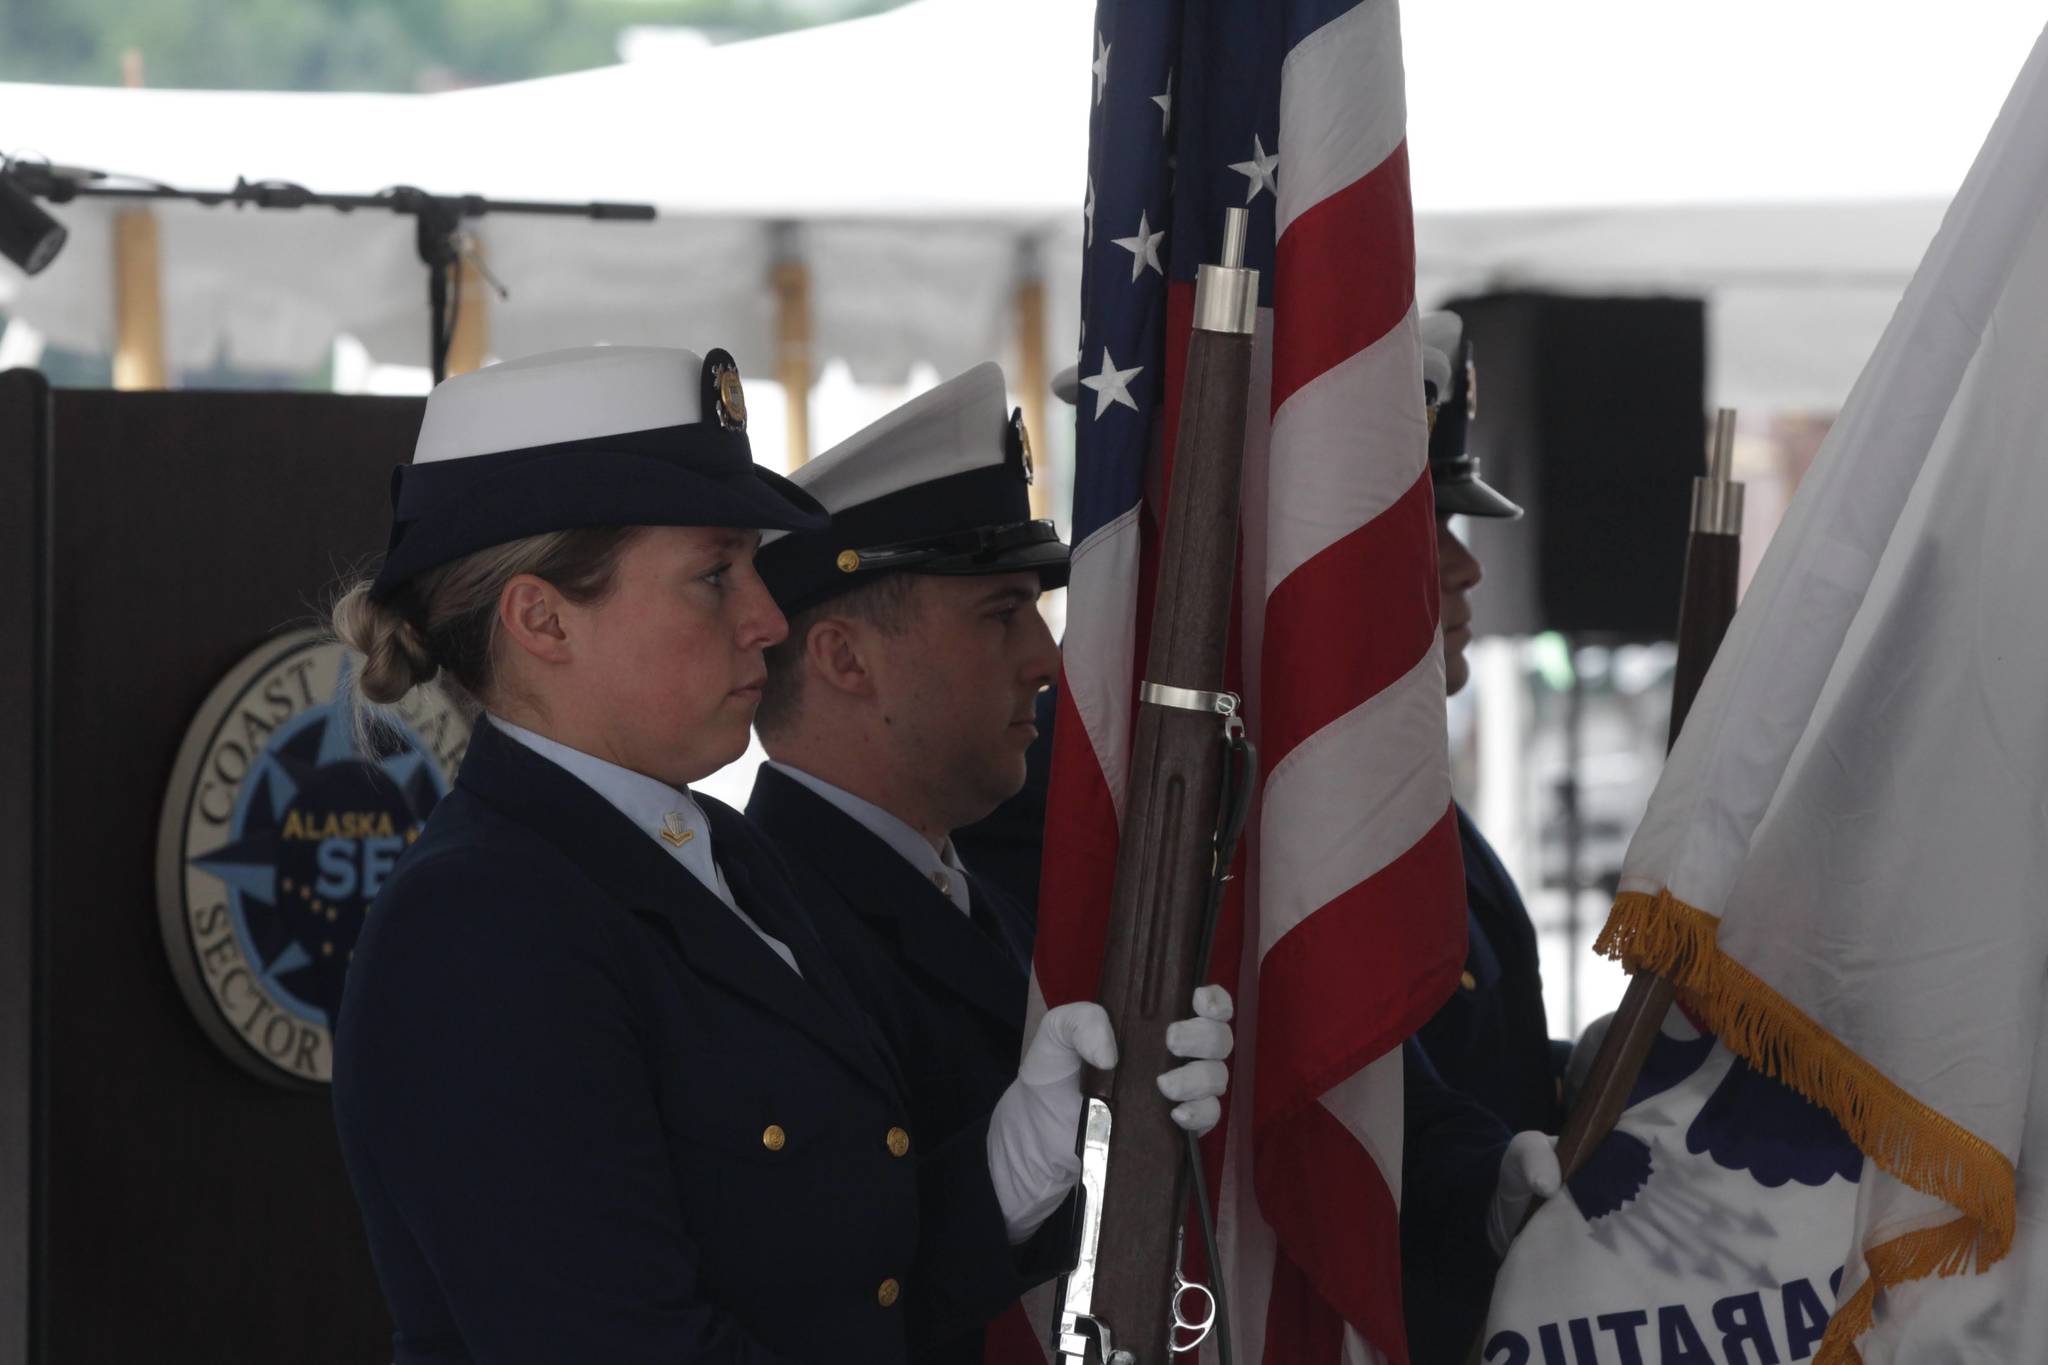 Coast Guardsmen parade the colors during a change of command ceremony at Station Juneau on July 7, 2021. (Michael S. Lockett / Juneau Empire)